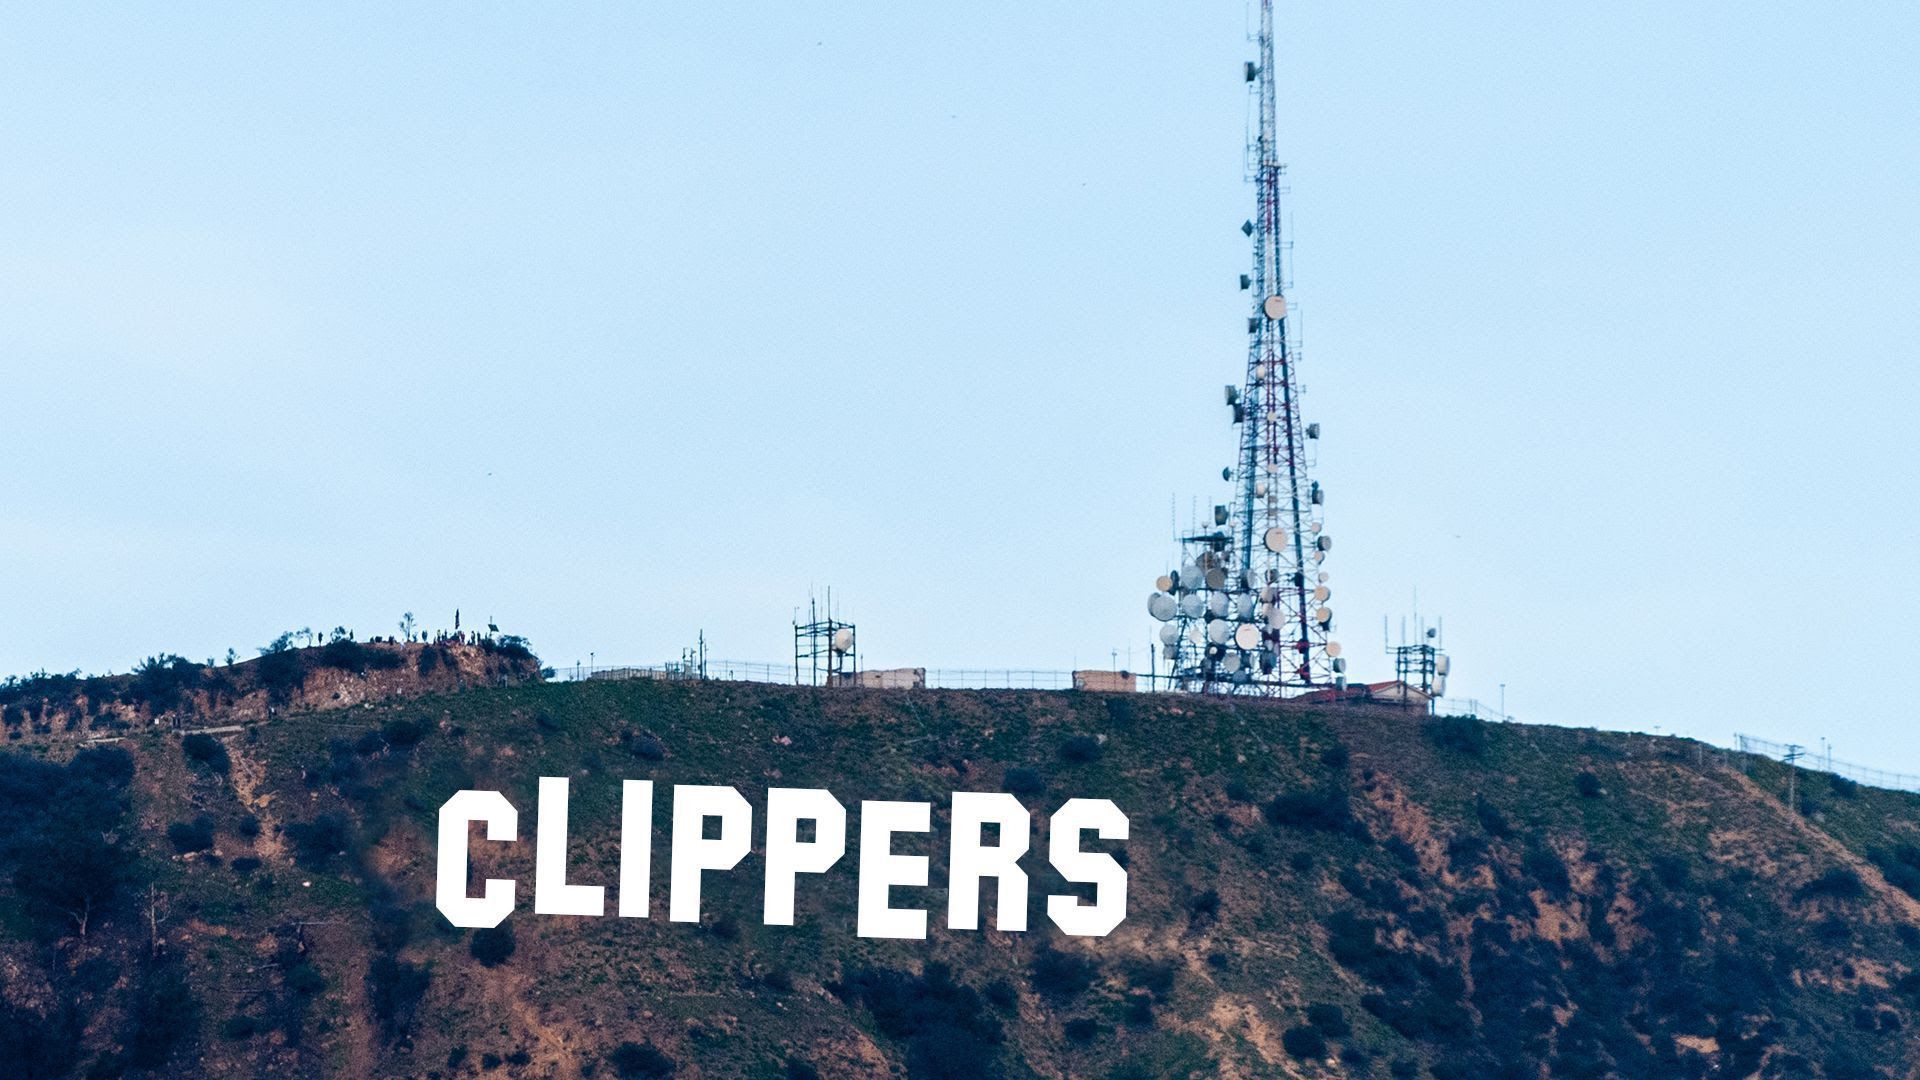 The Clippers team name replacing the Hollywood sign in a photo